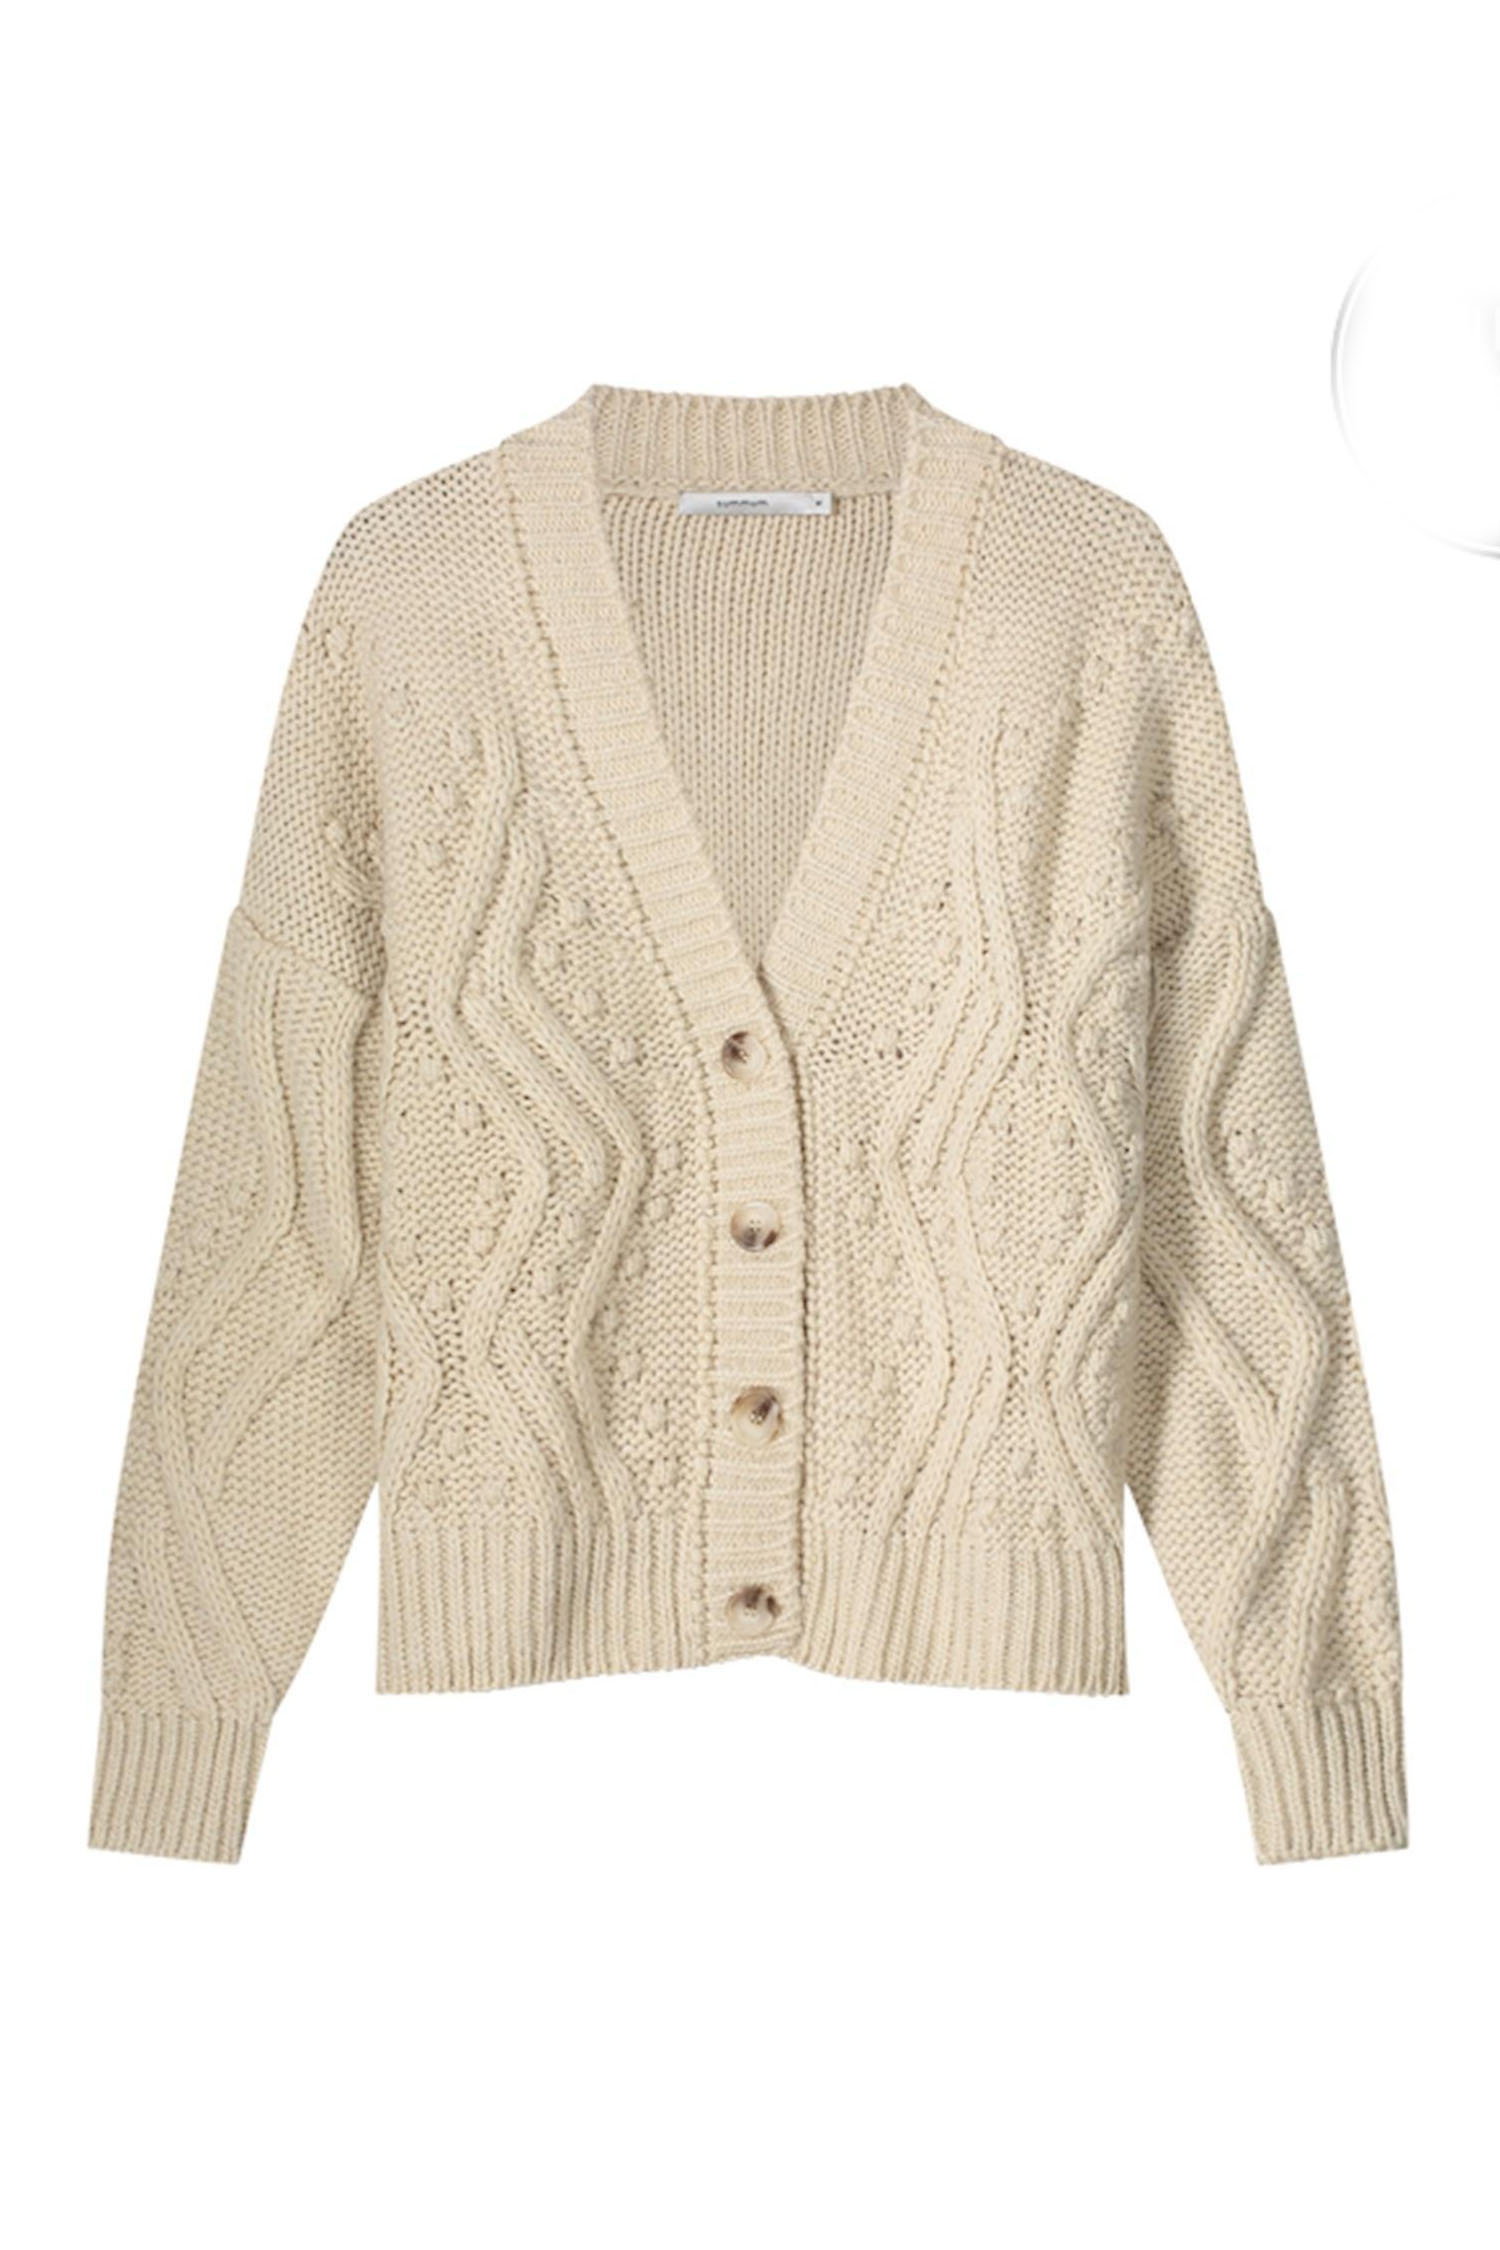 Summum 7s5789-7967 cardigan chunky cable and dots